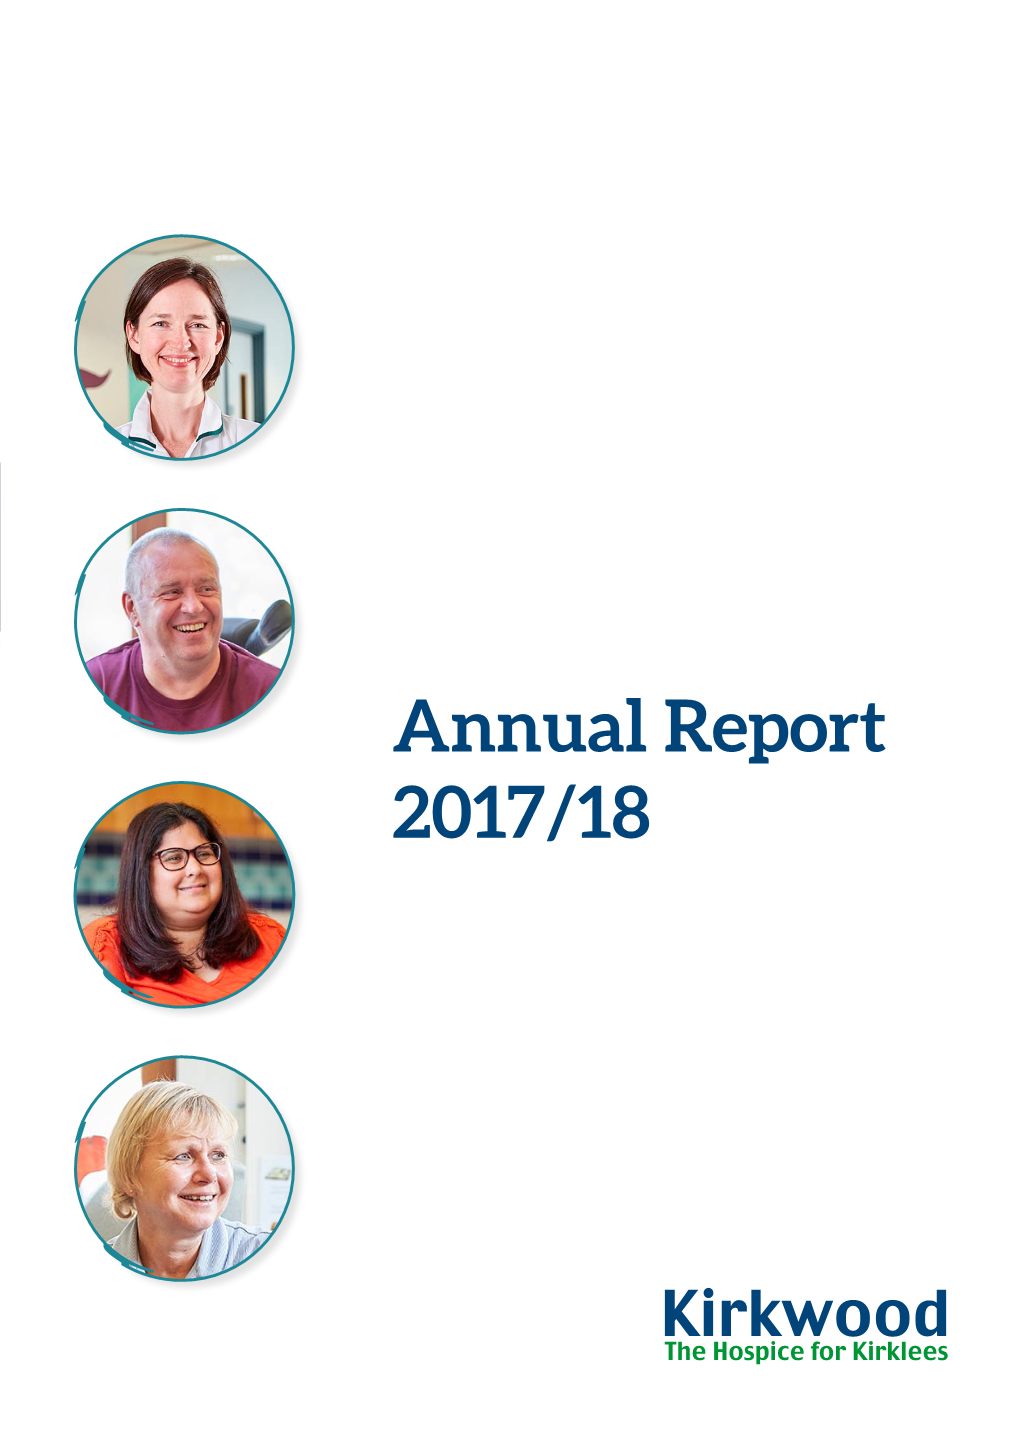 Annual Report 2017/18 We Are Here to Support Anyone Affected by a Life Limiting Illness, Every Step of the Way